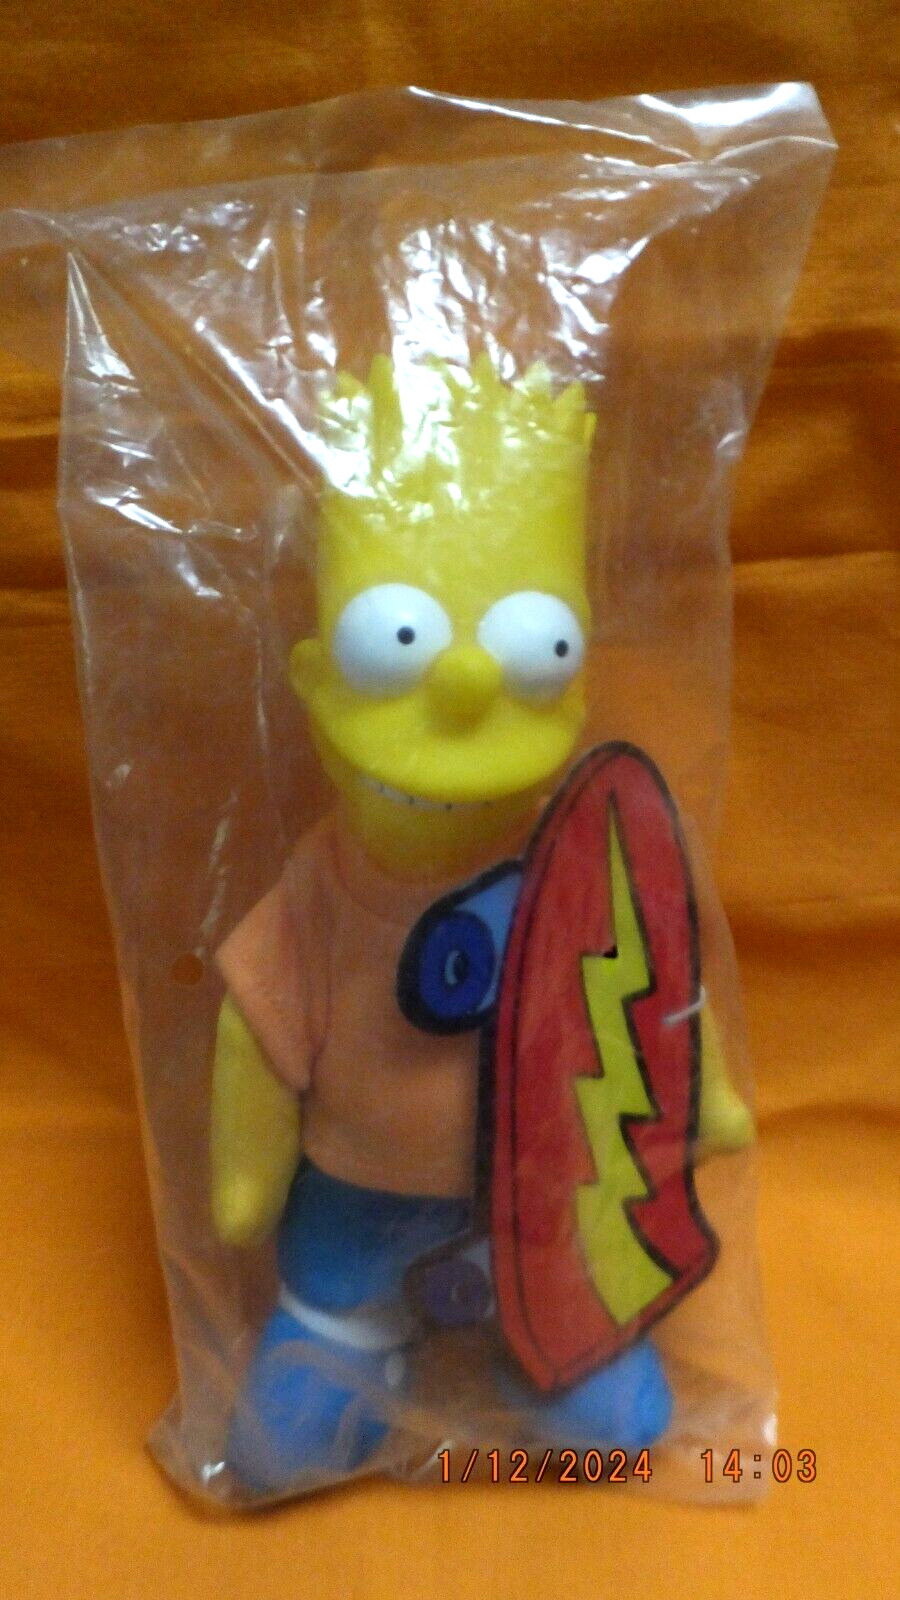 BART SIMPSON THE Simpsons BURGER KING Promo DOLL -NEW SEALED 1990 Price Reduced